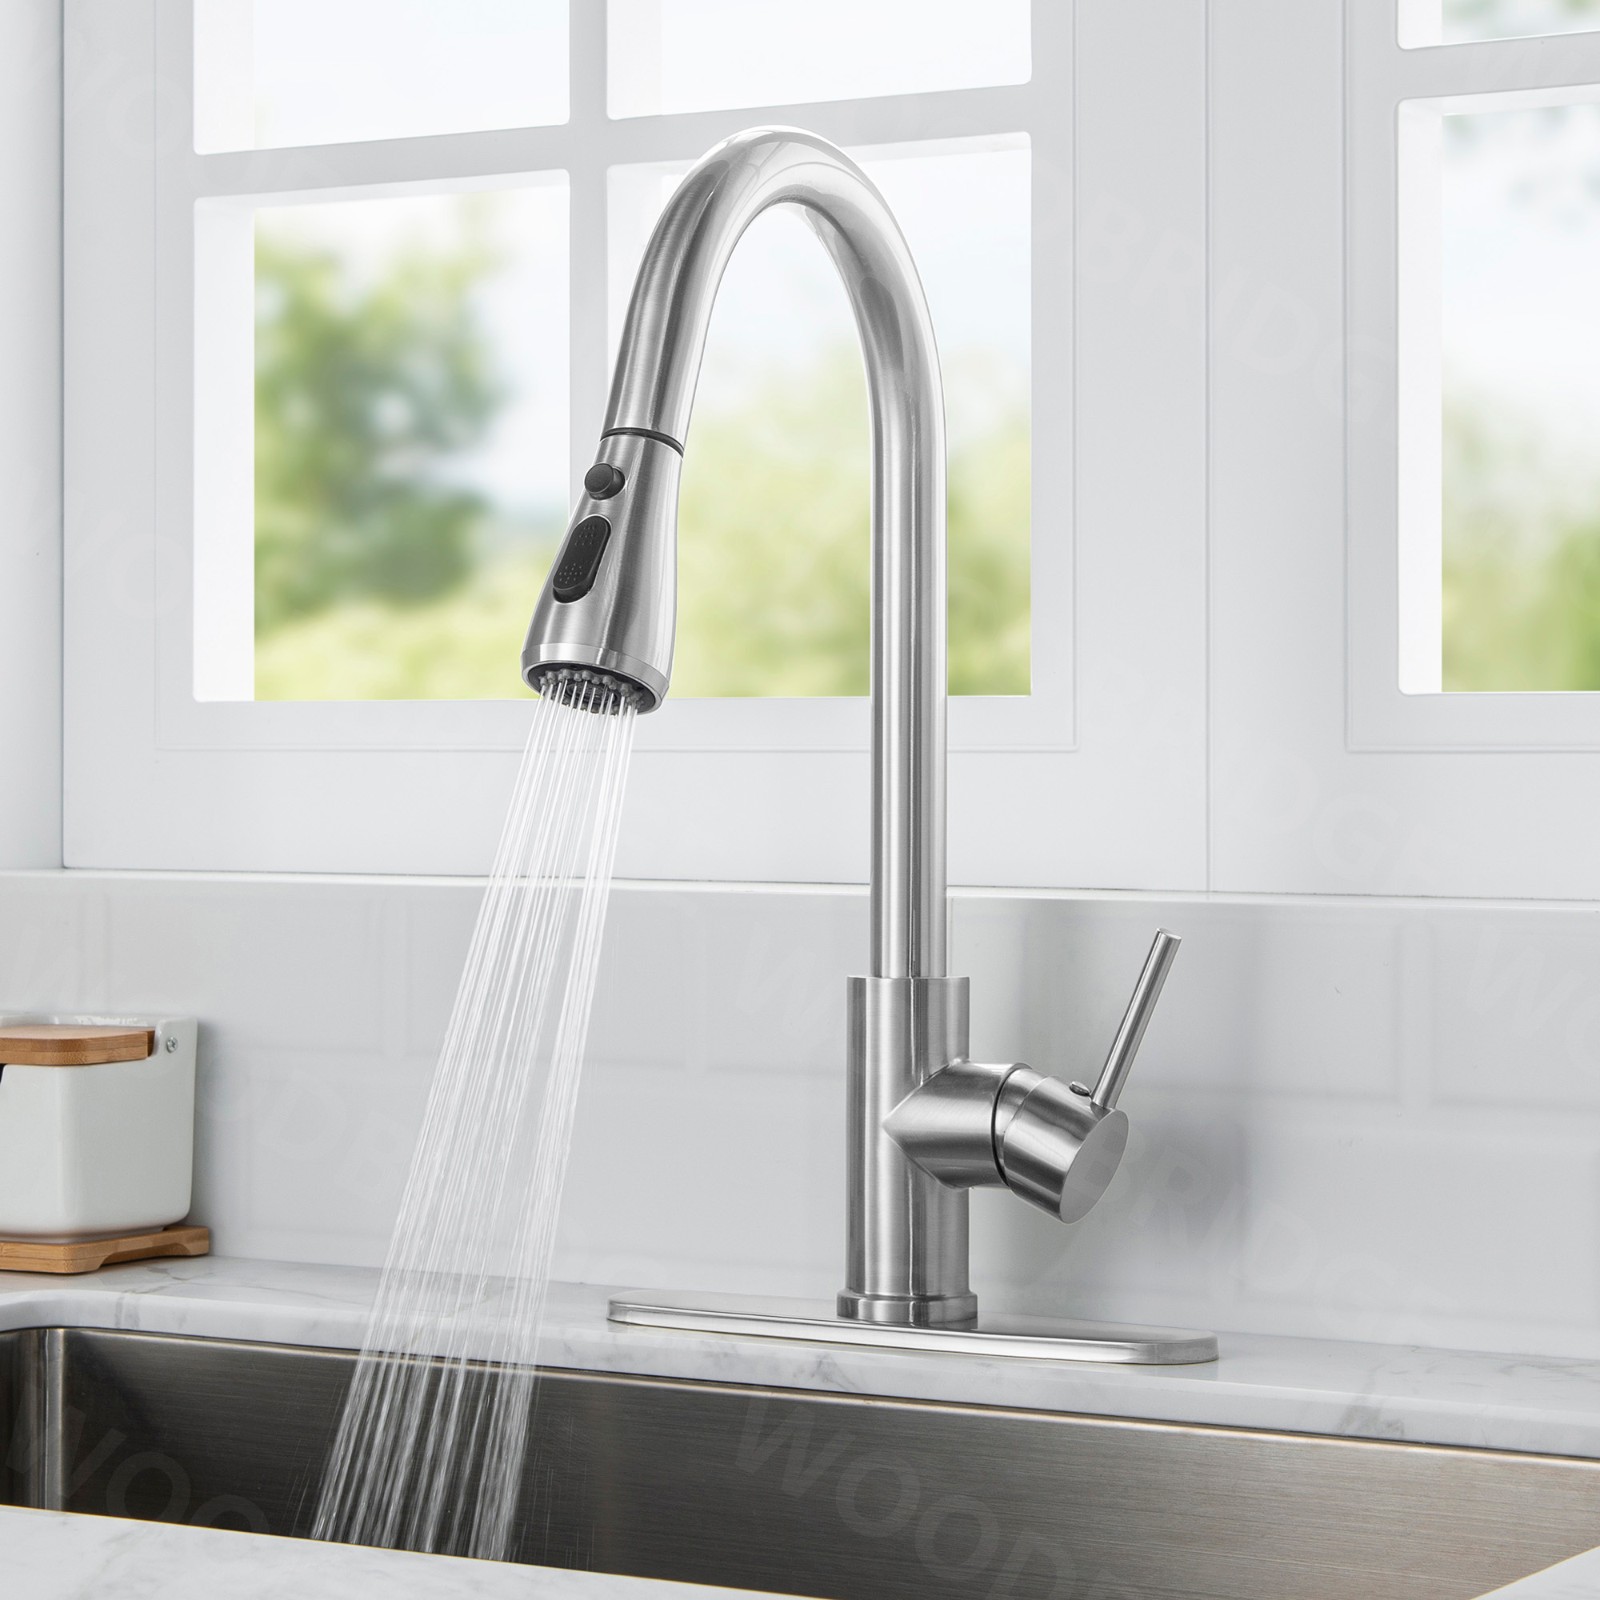  WOODBRIDGE WK090802CH Single Handle Pull Down Kitchen Faucet in Polished Chrome Finish._5023